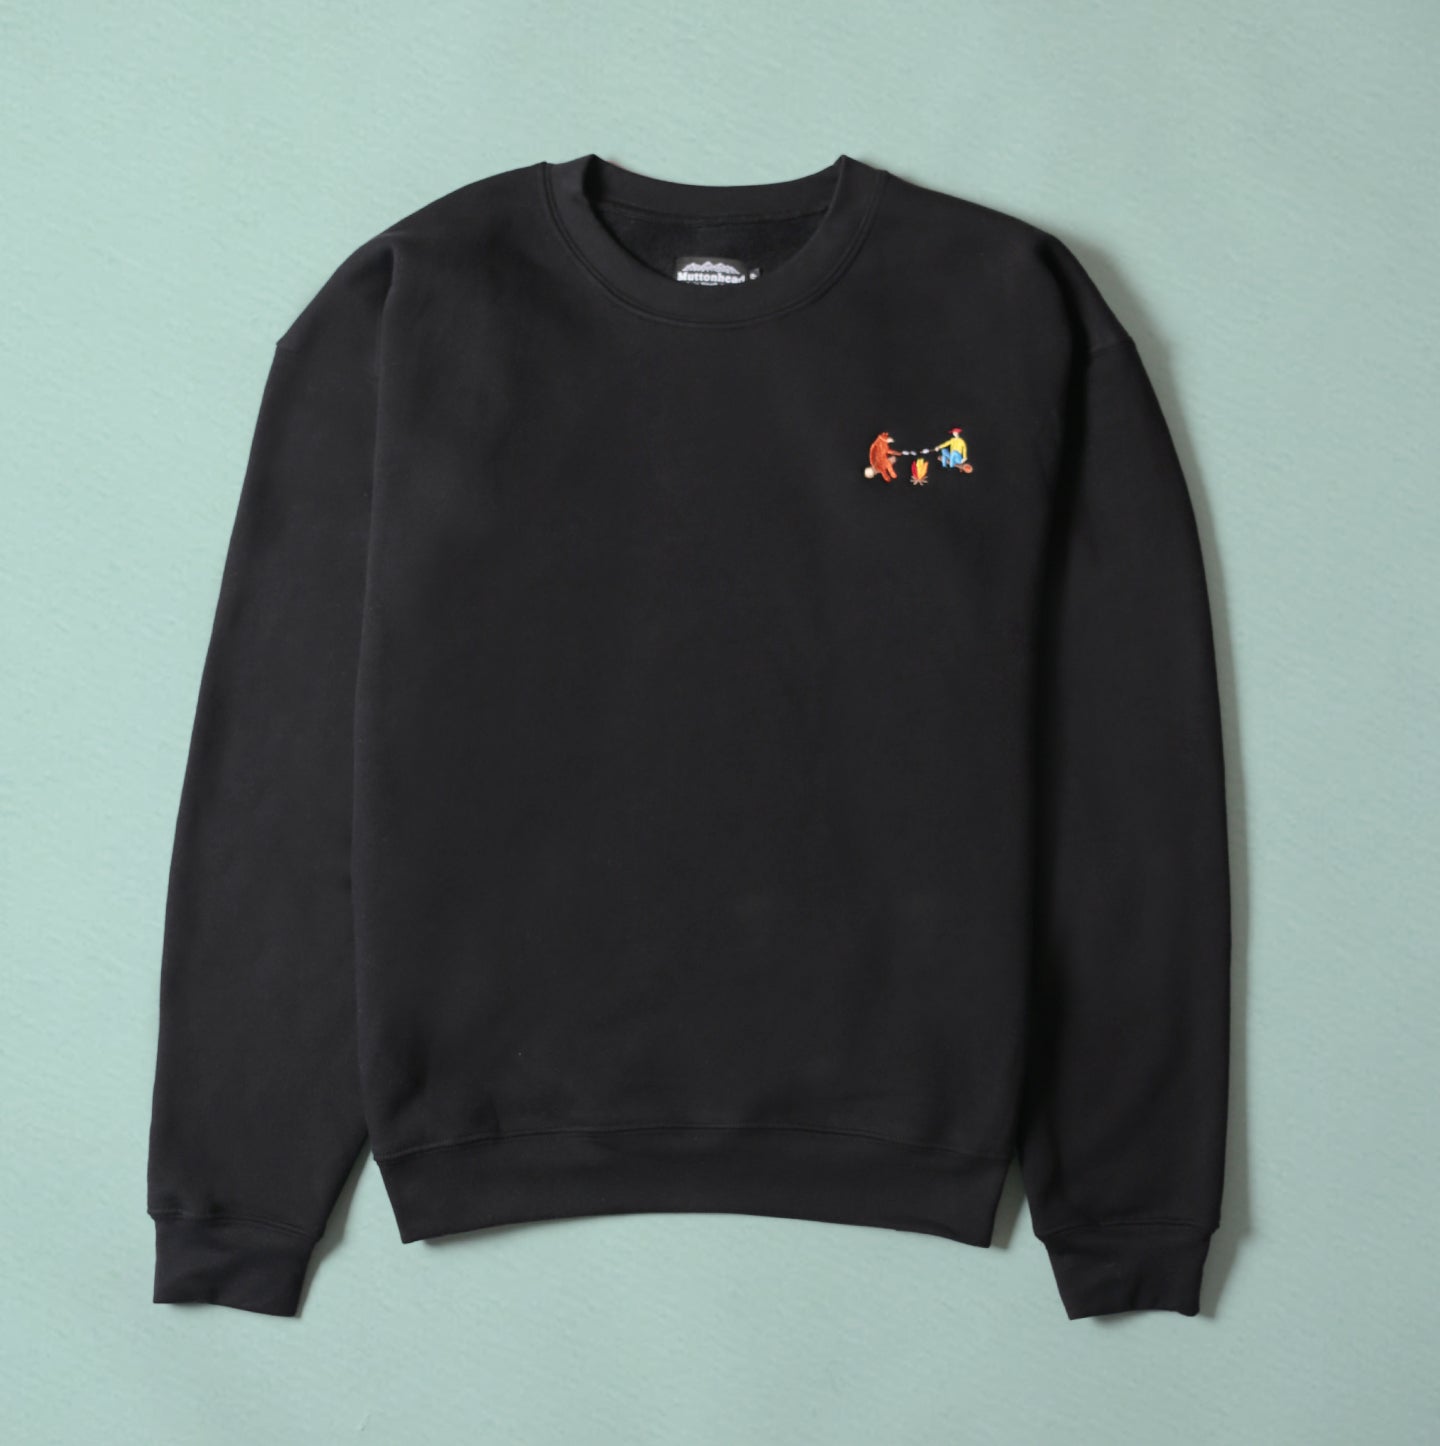 Oversize Crew - Black - Campfire Friends Embroidery -  CAMP Series